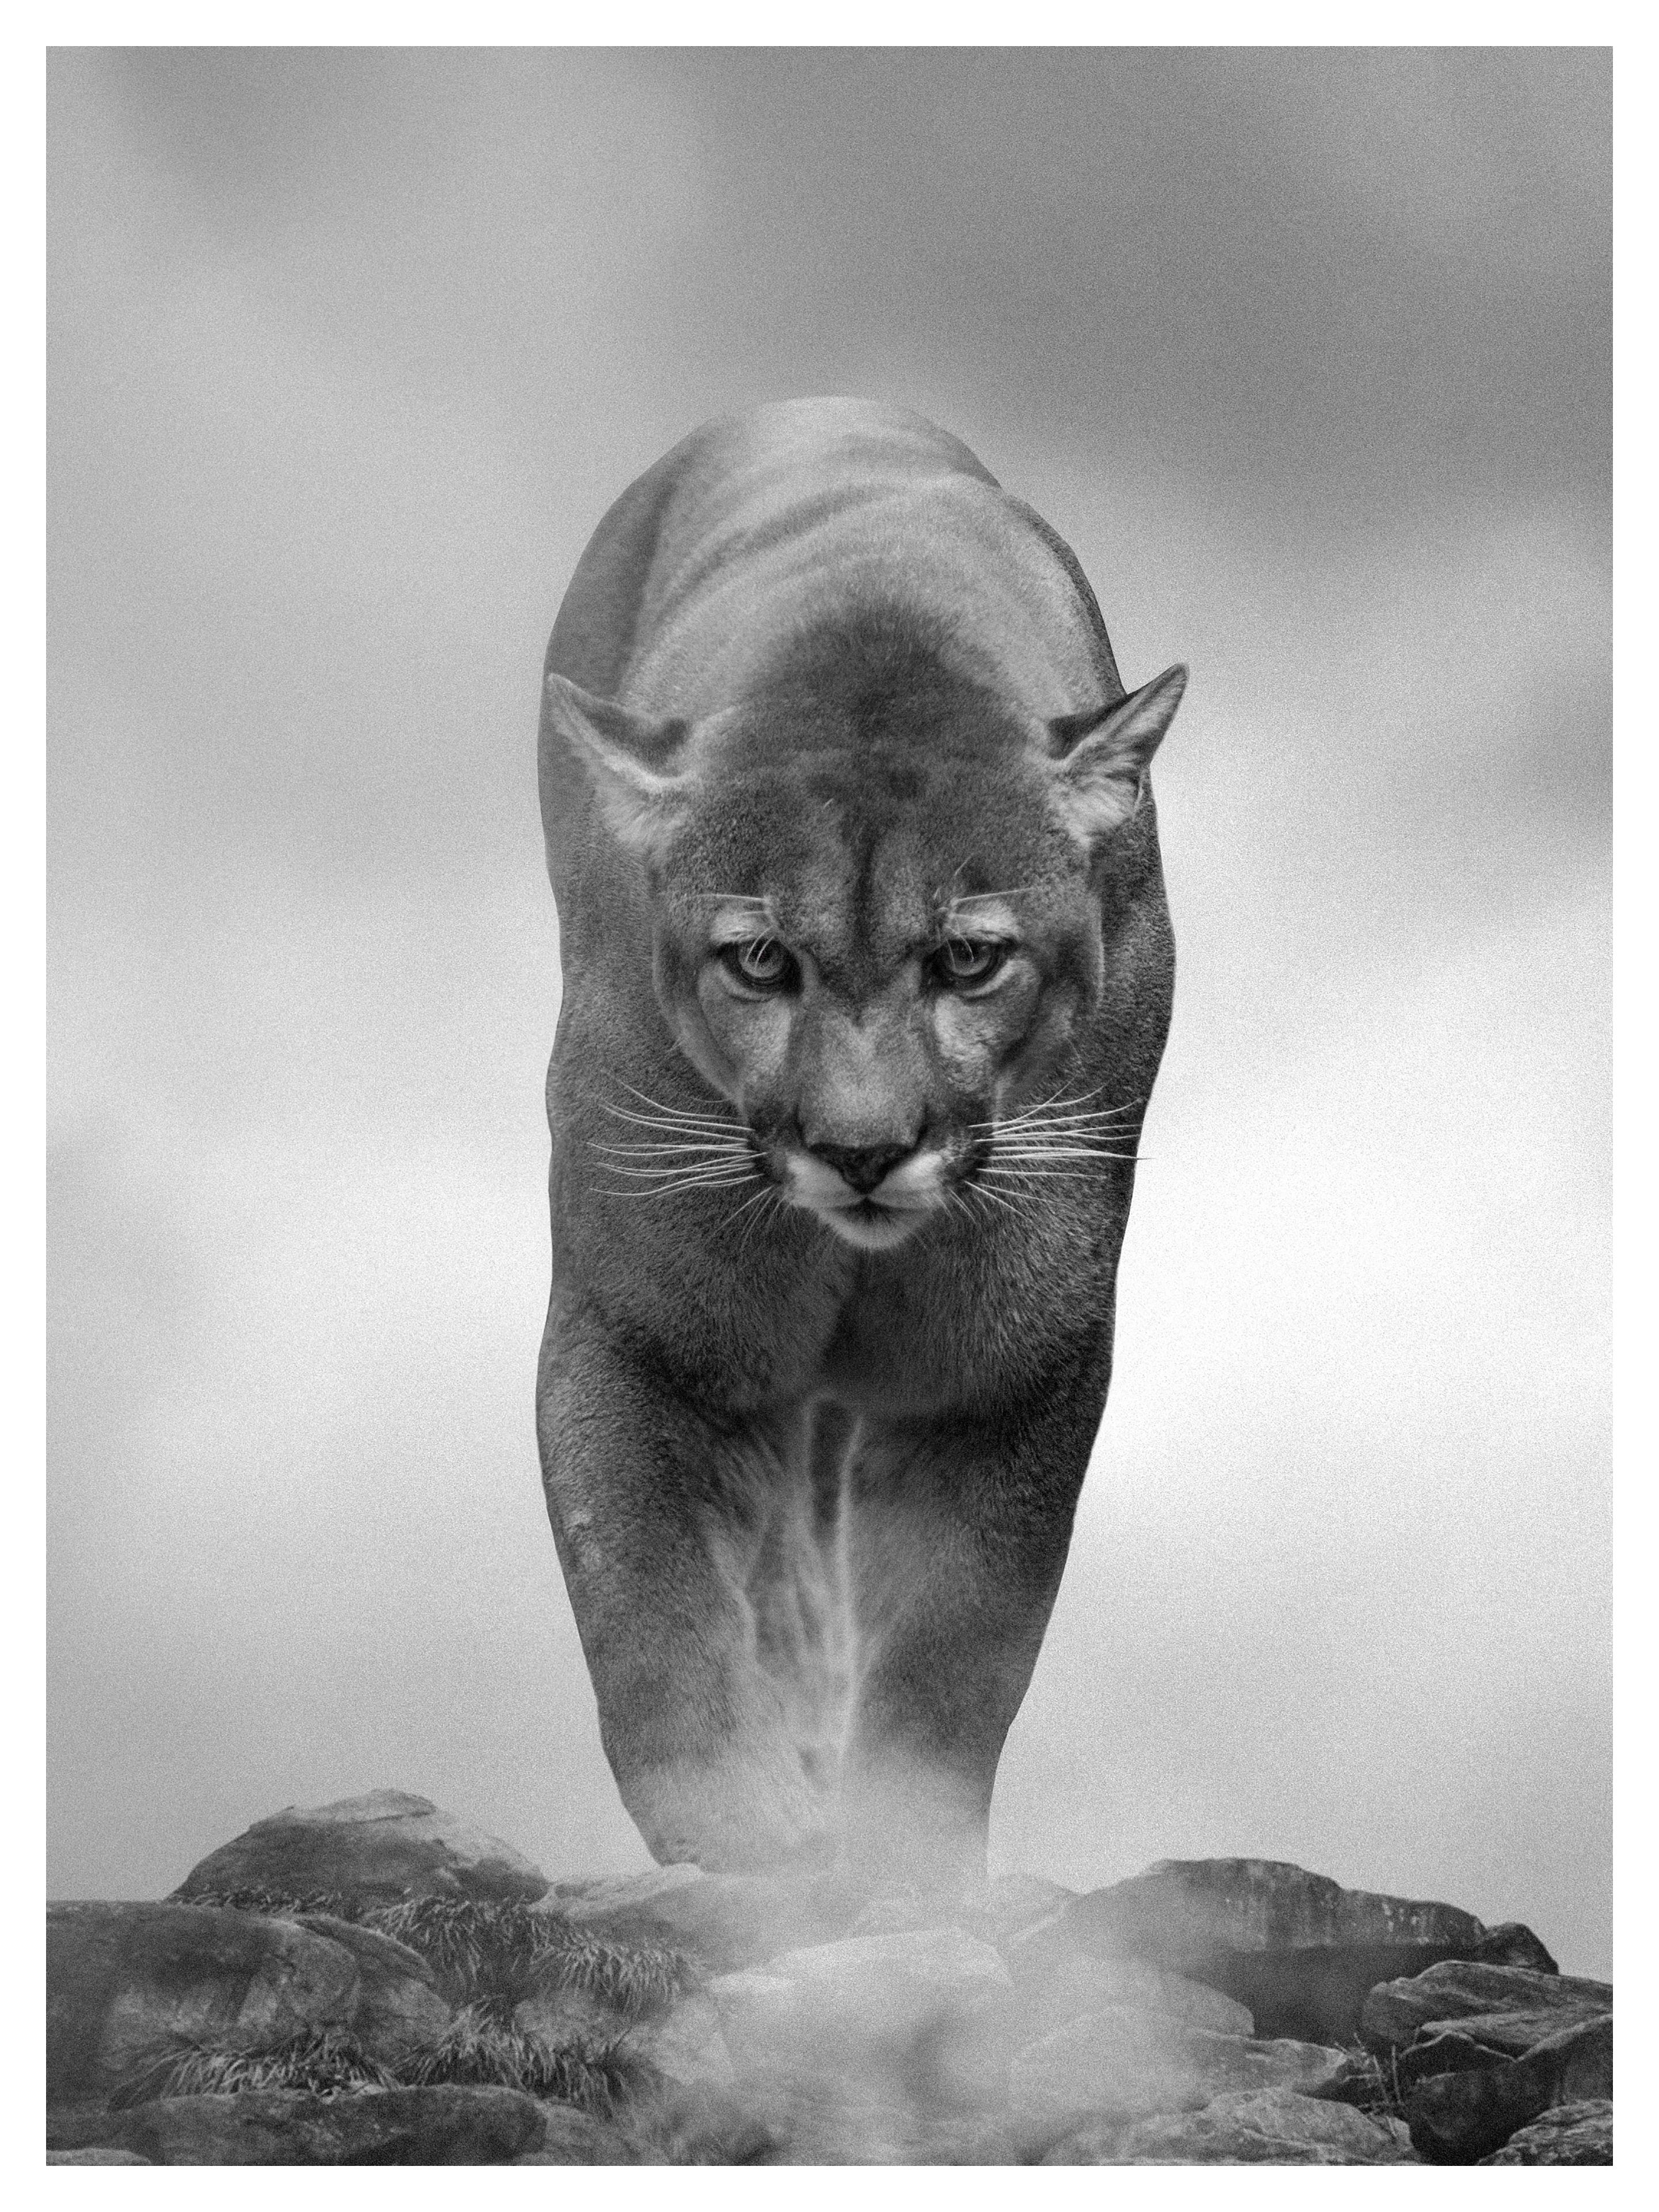 Shane Russeck Animal Print - "King of the Mountain" 20x30 Black and White Photography, Cougar, Mountain Lion